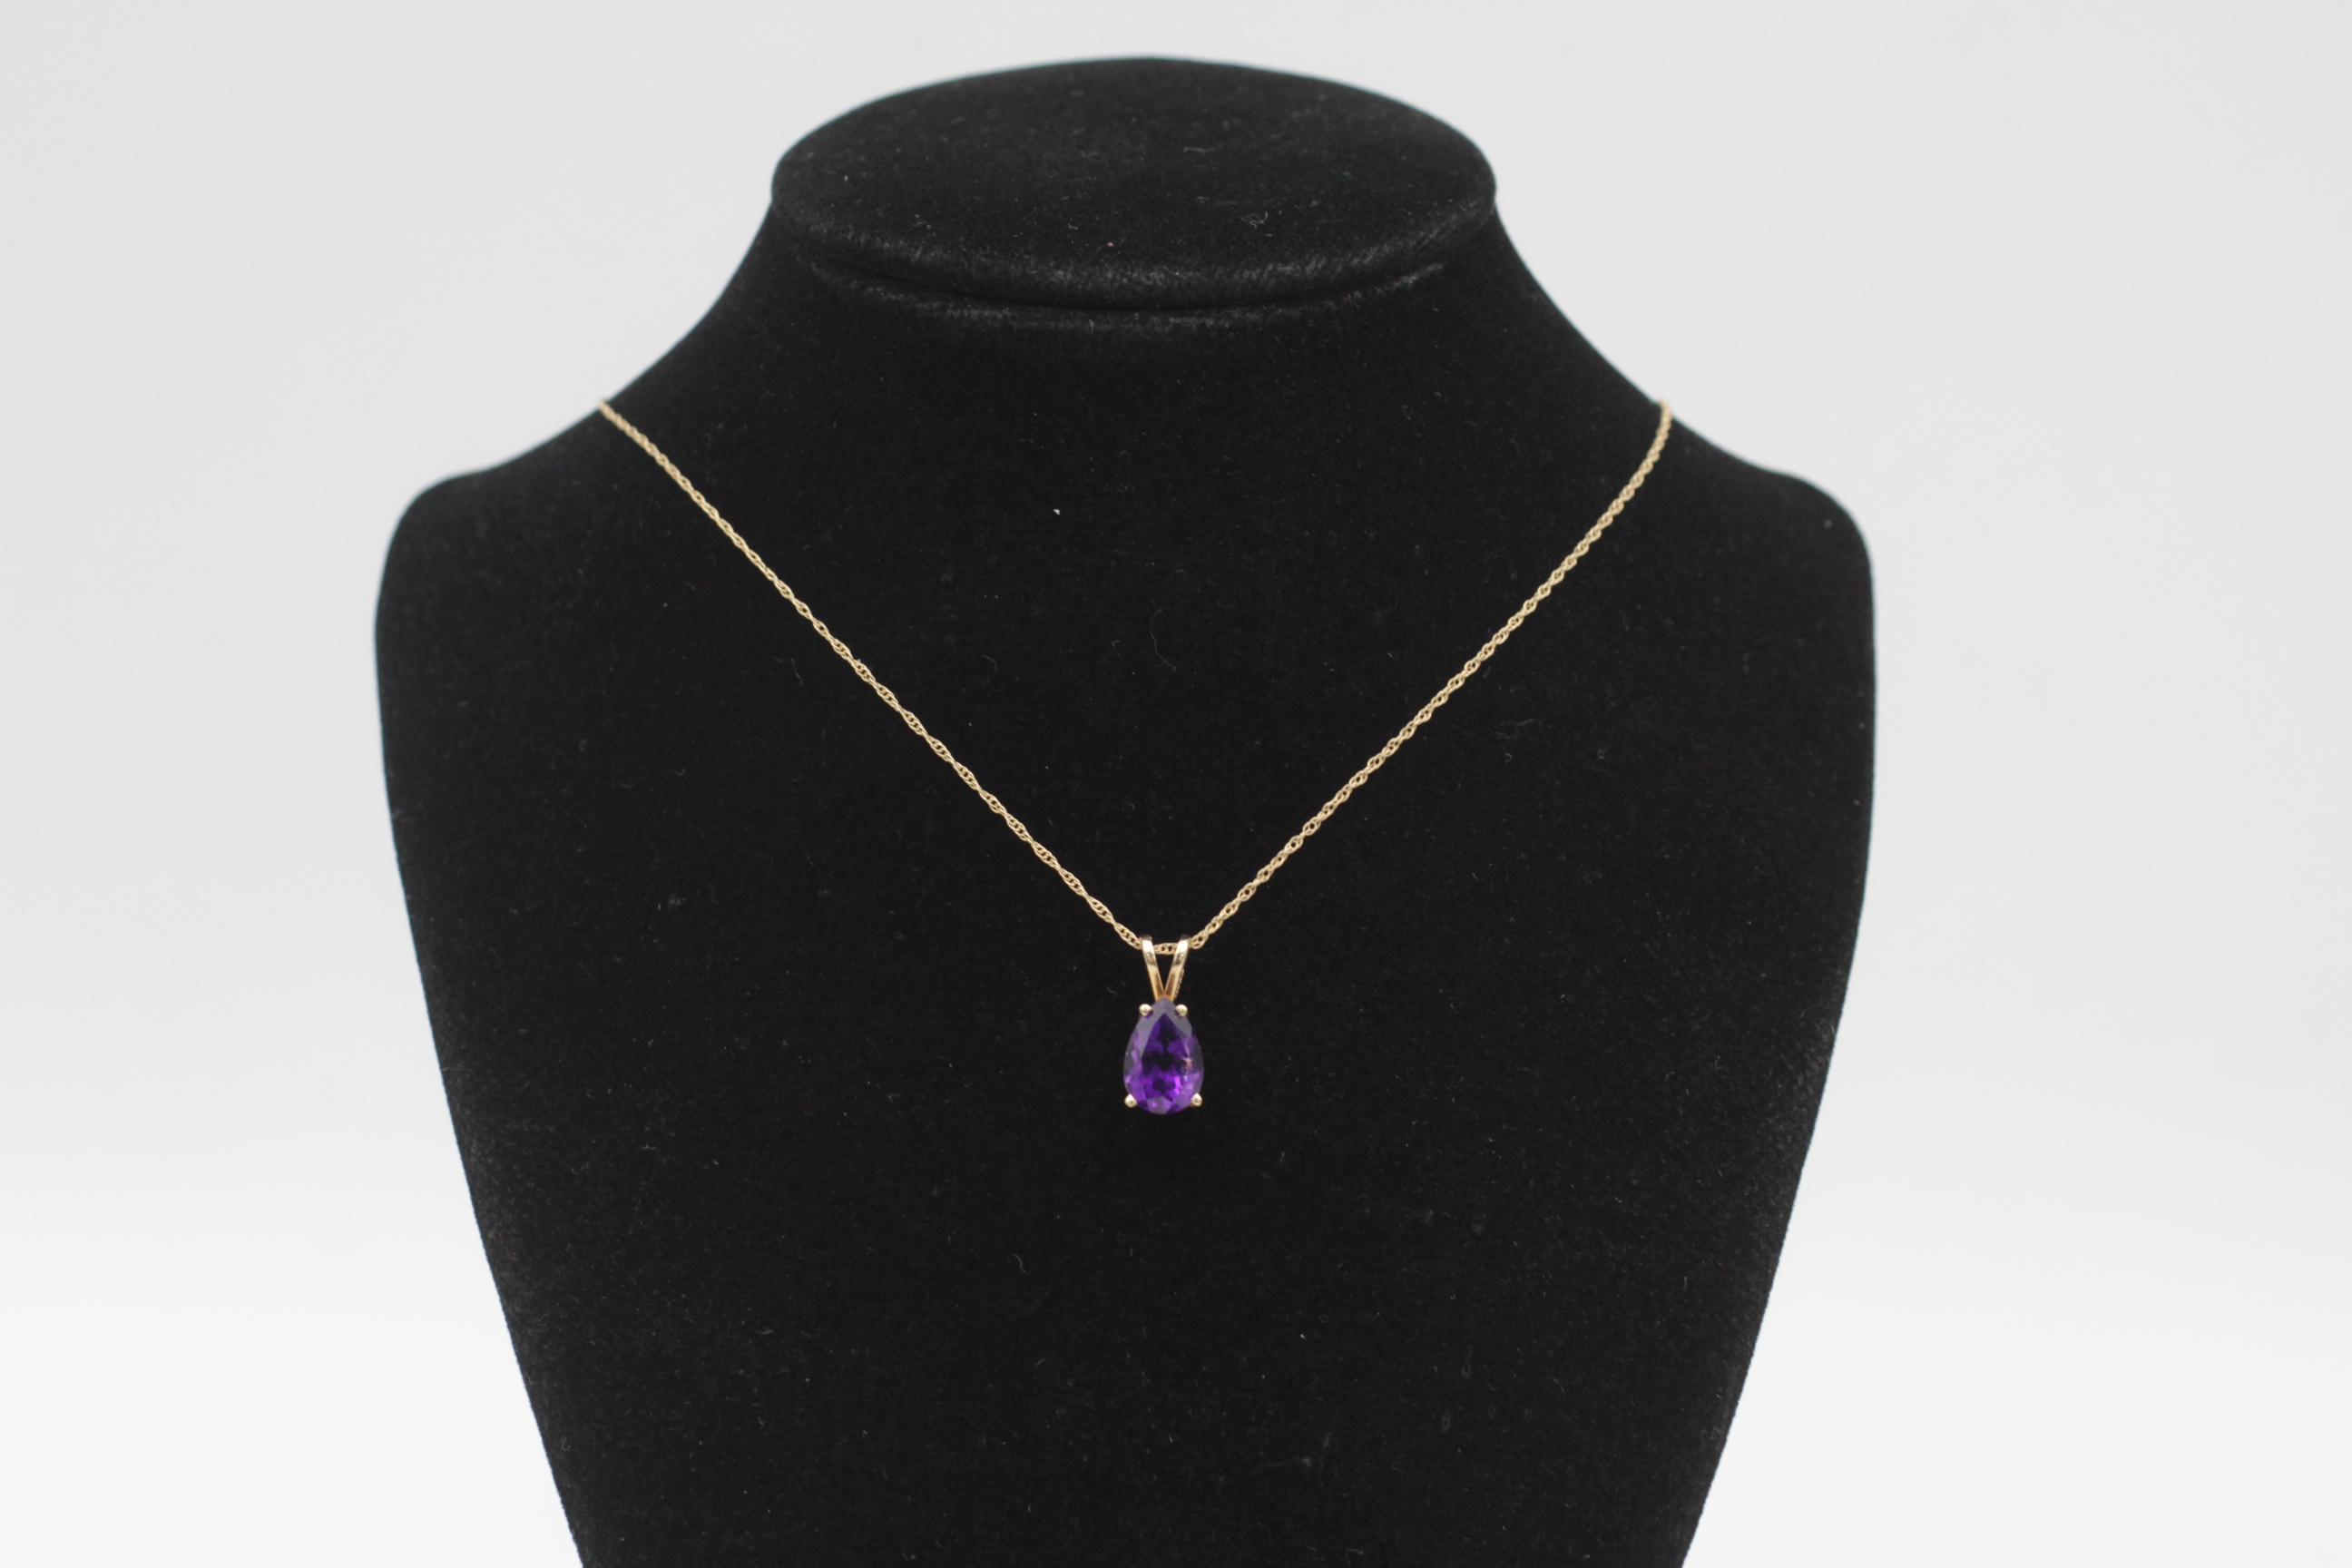 14ct gold amethyst solitaire pendant necklace (1.6g)